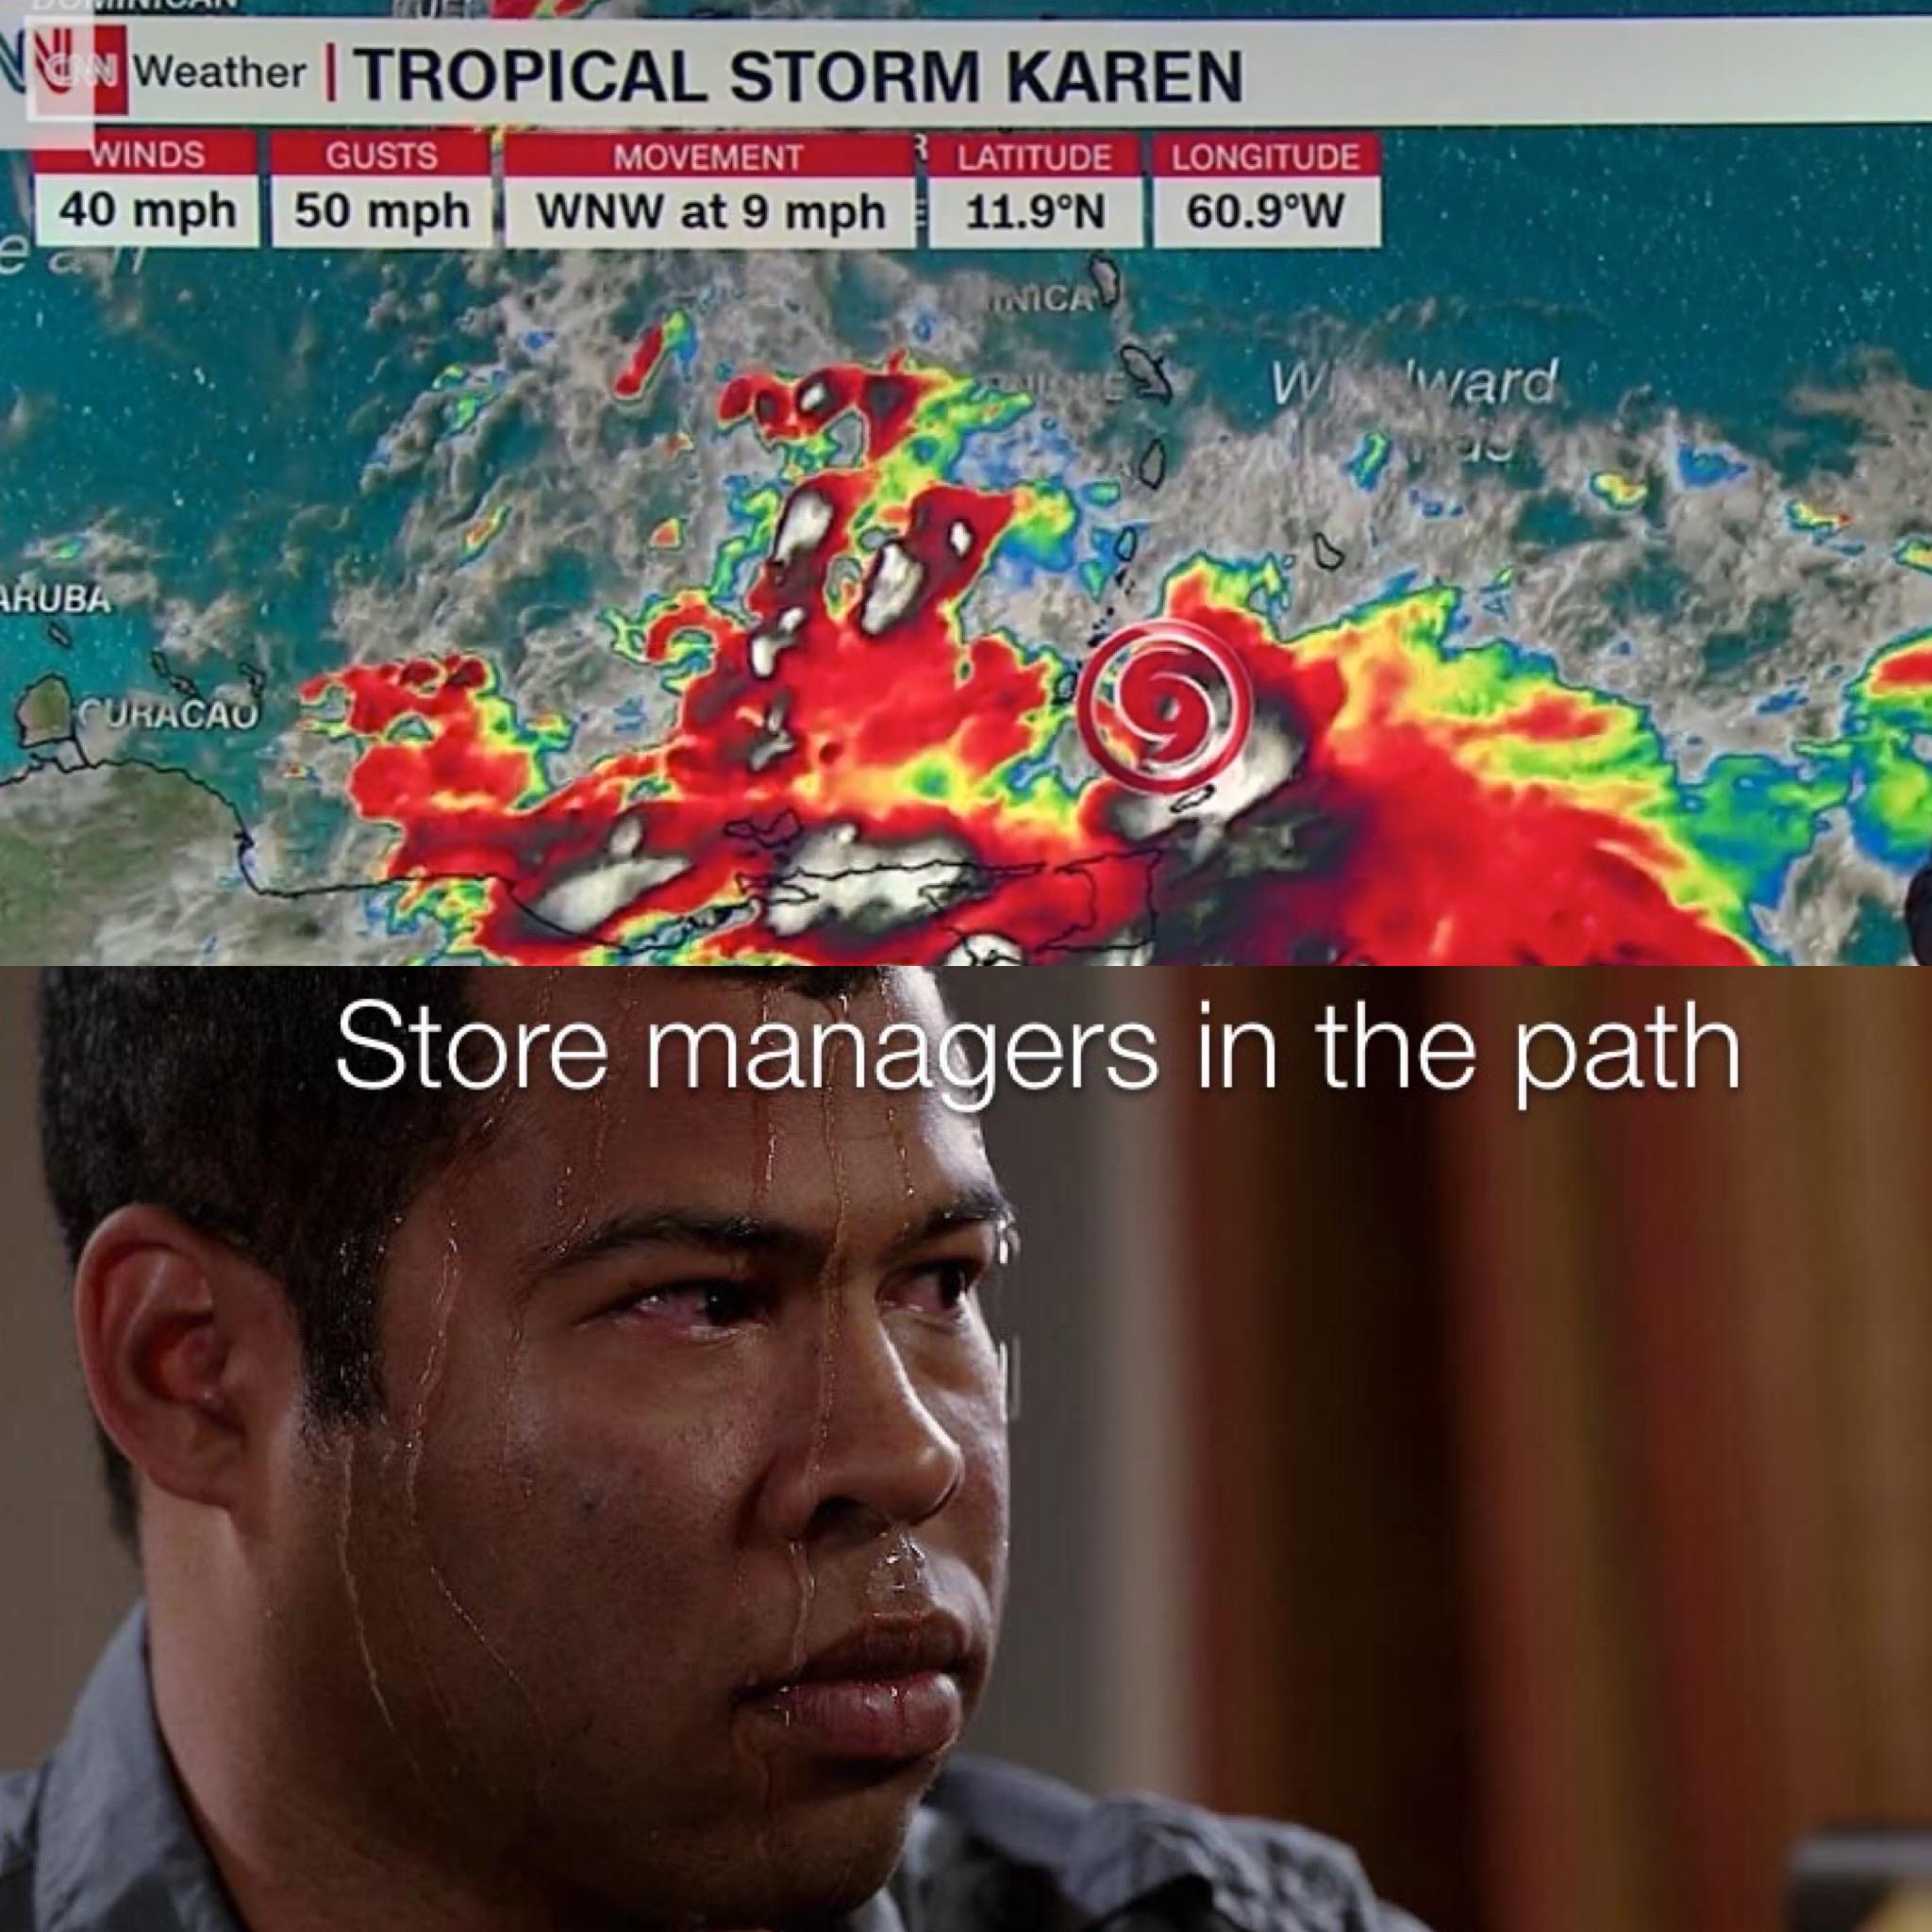 poster - Te Weather | Tropical Storm Karen Winds Gusts Movement ? Latitude Longitude 40 mph 50 mph Wnw at 9 mph 11.9N 60.9W w ward Aruba Wracao Store managers in the path